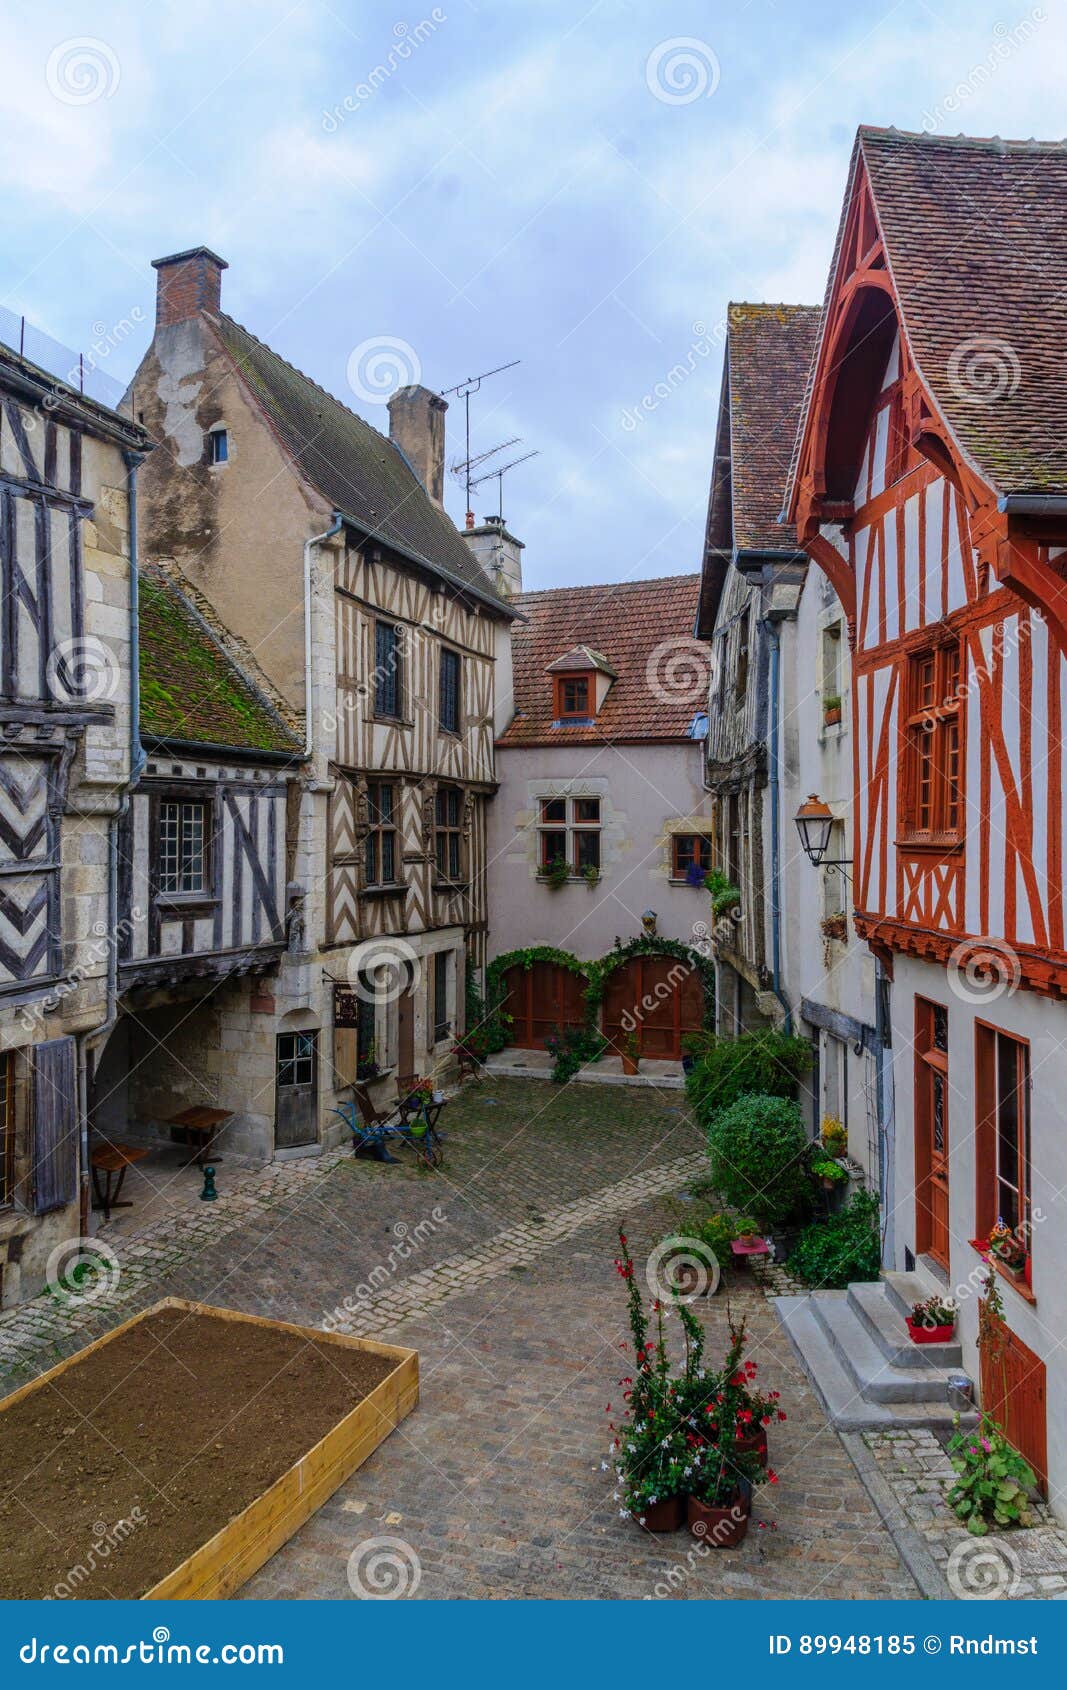 square with half-timbered houses, in the medieval village noyers-sur-serein